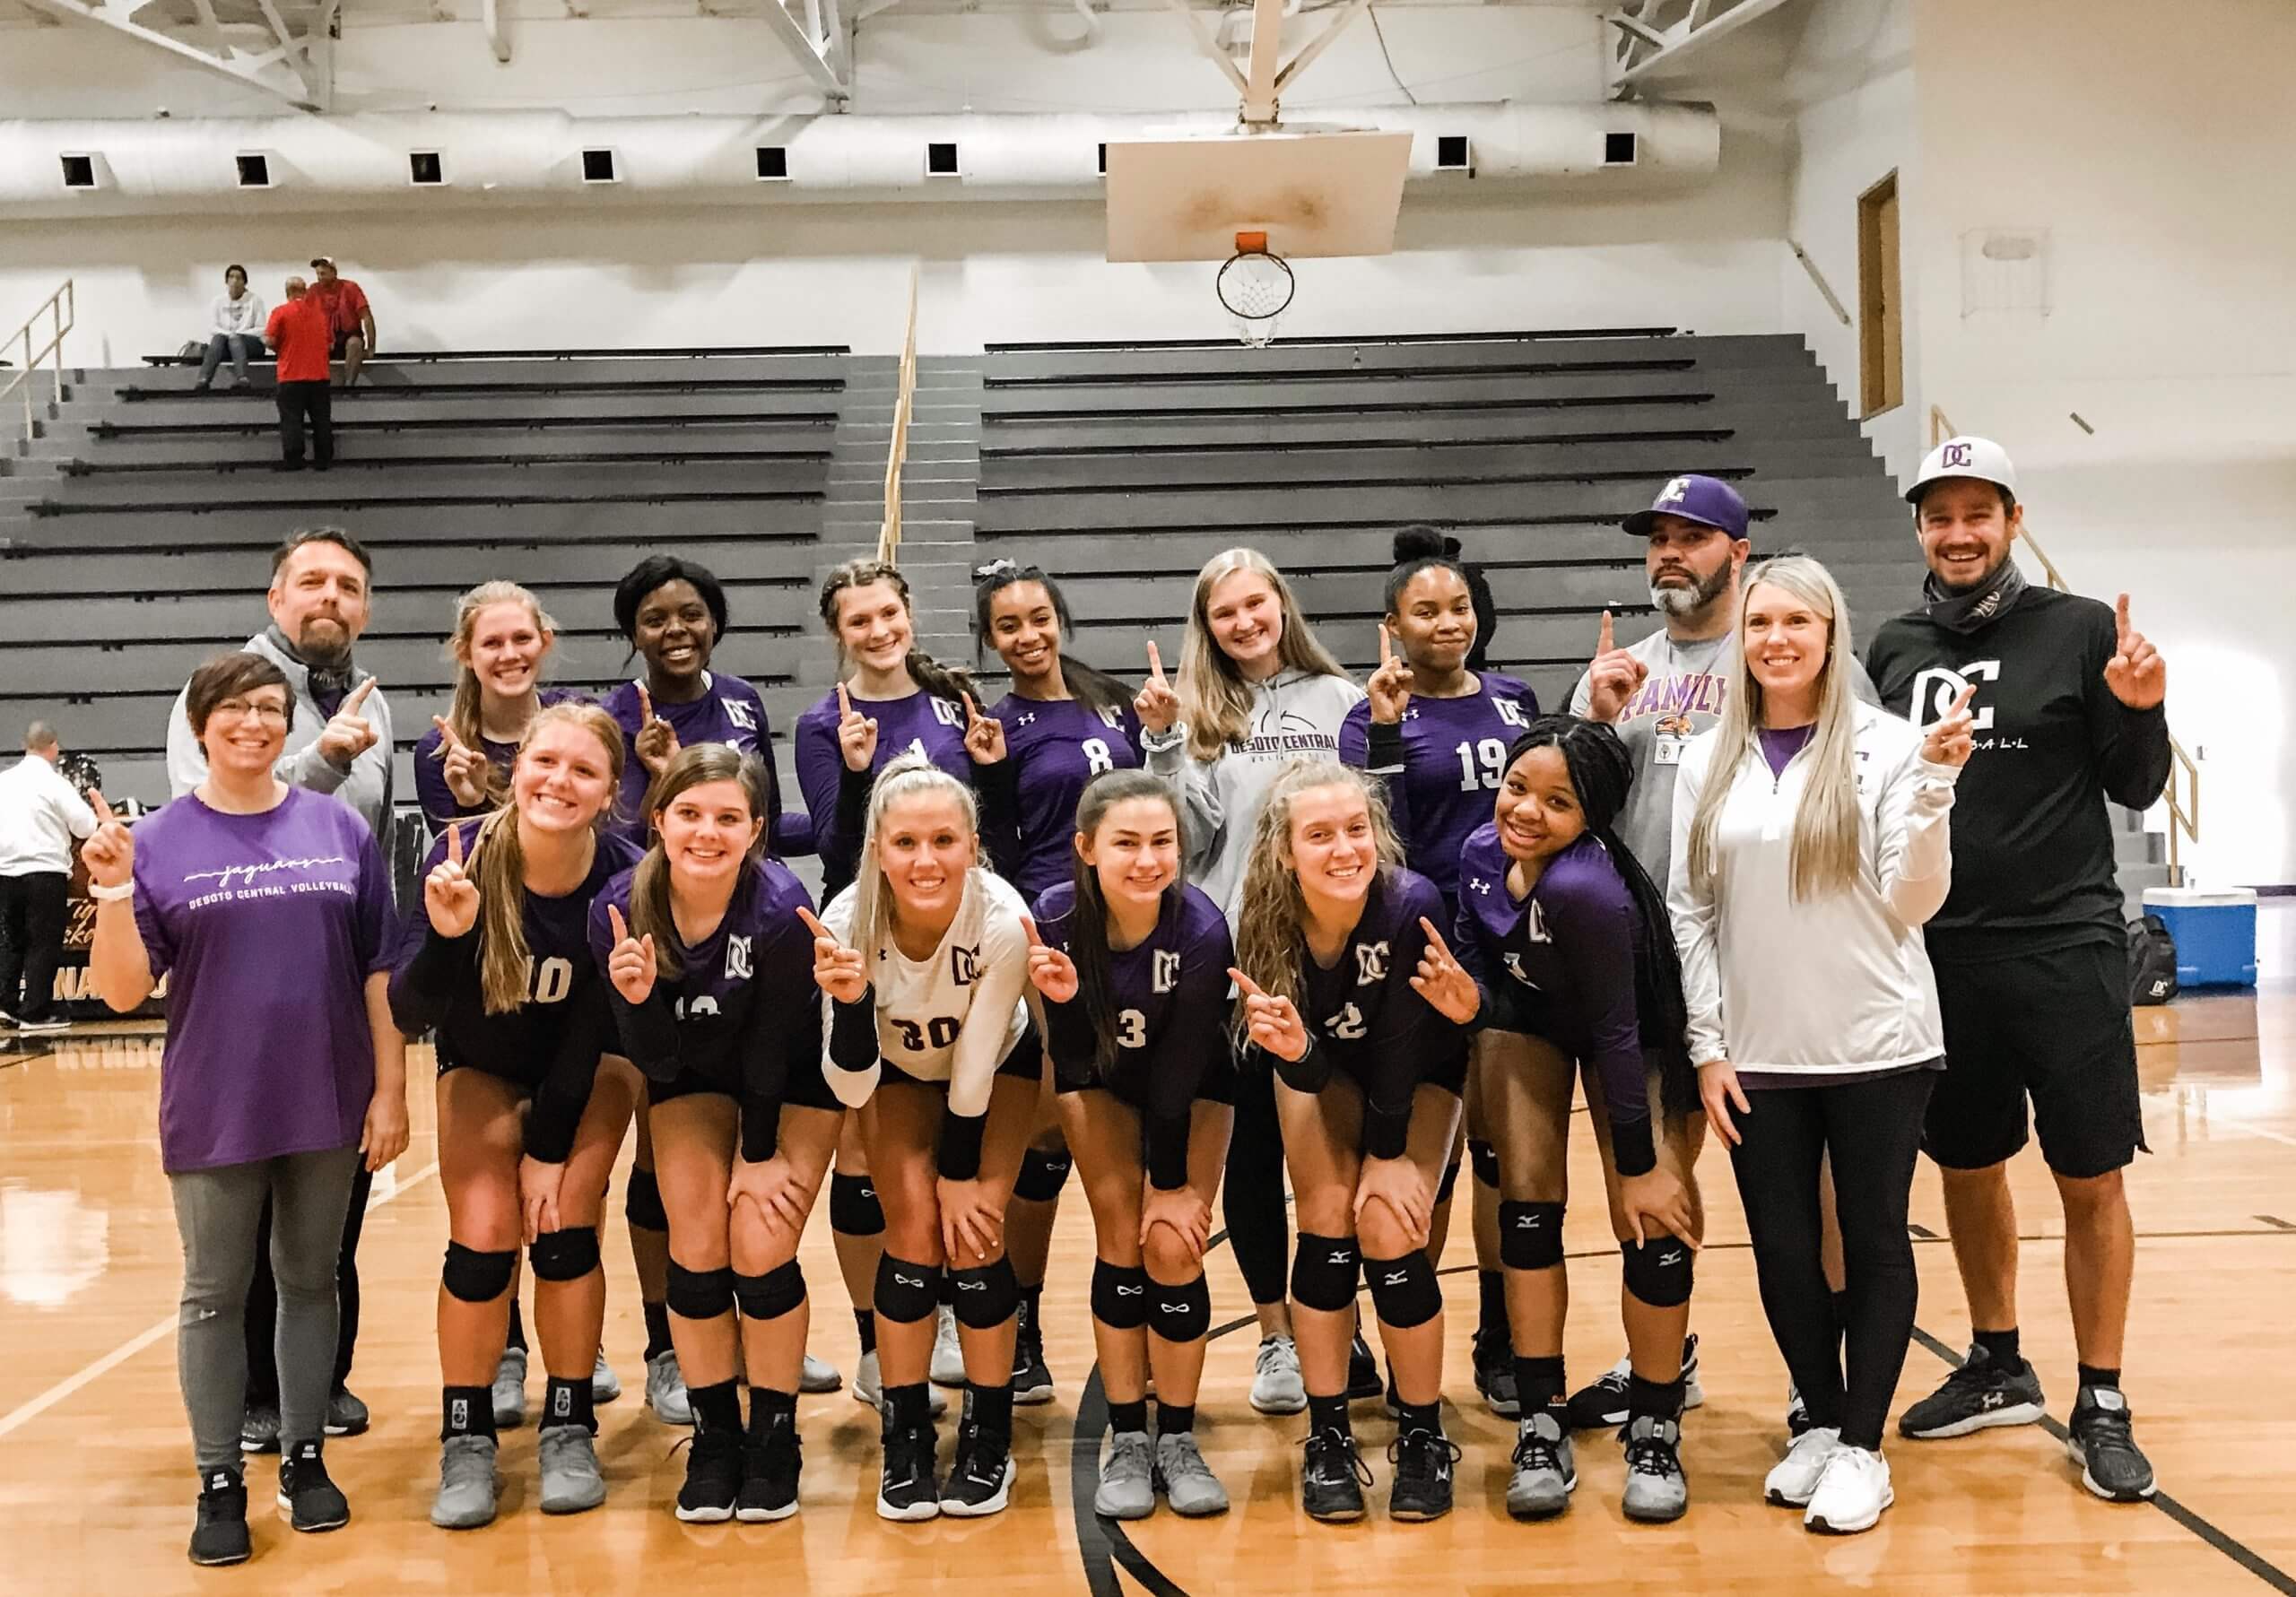 Volleyball: Lady Jags win county title, Northpoint advances